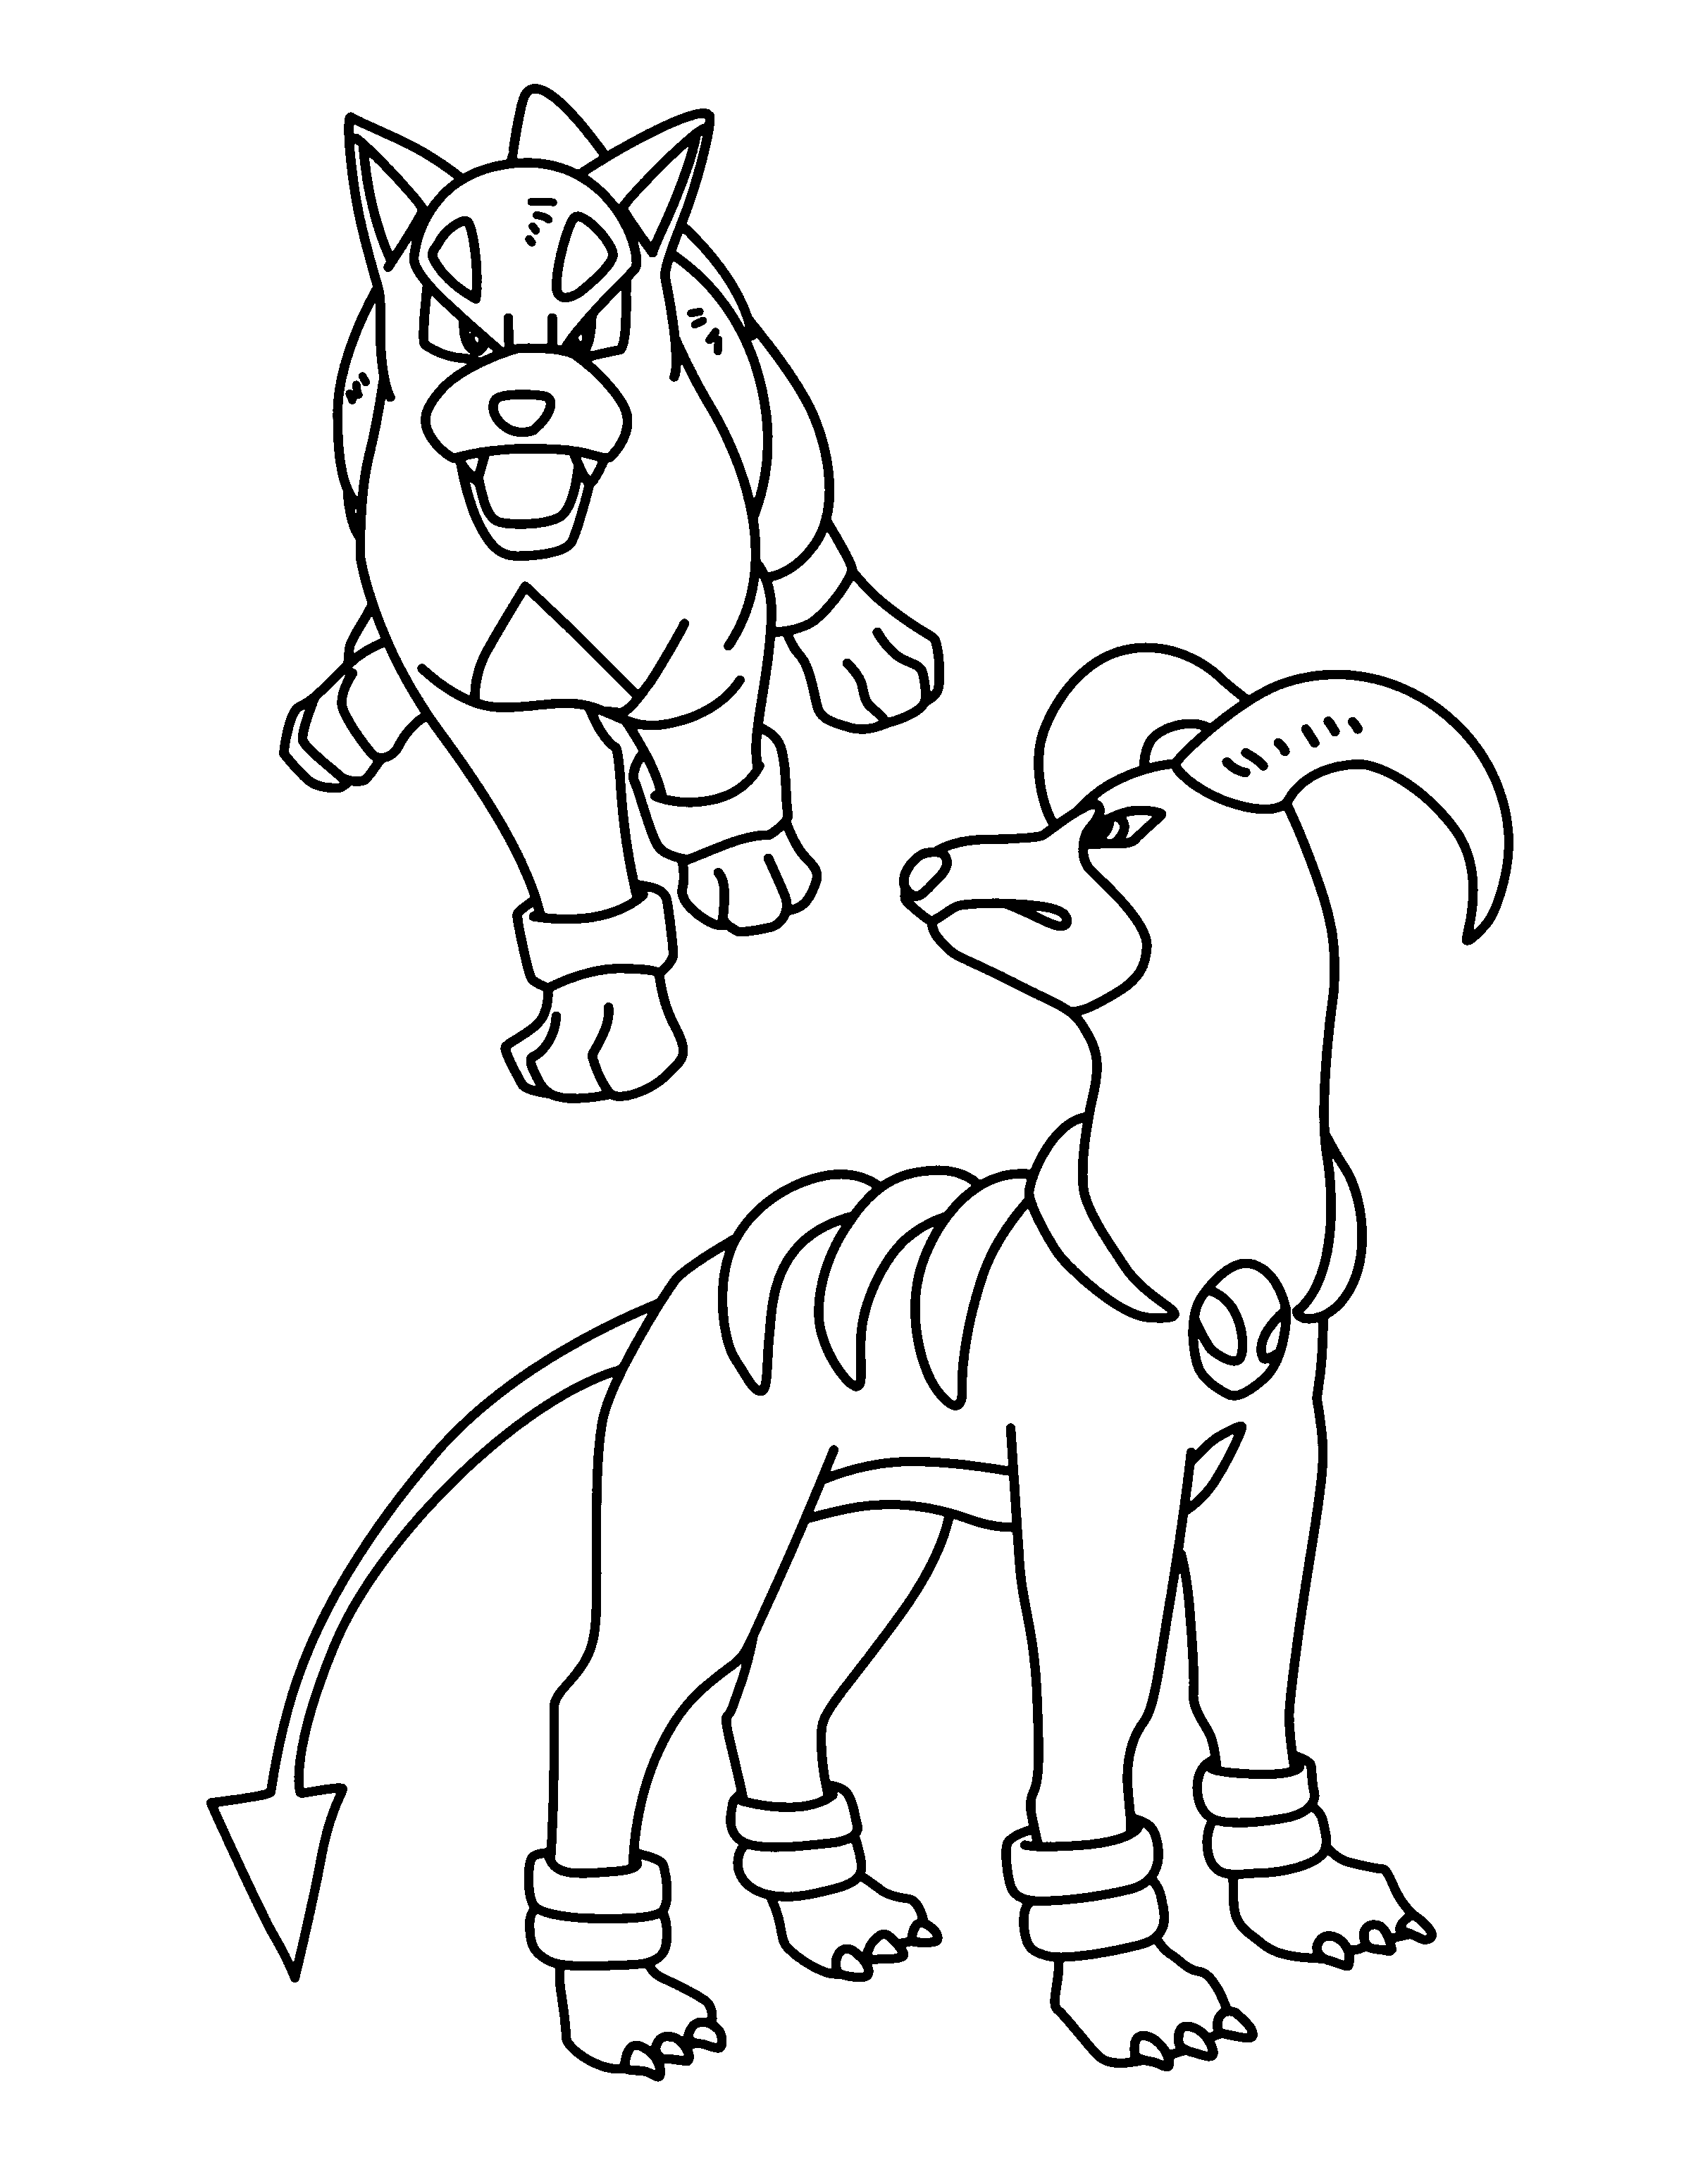 Coloring Page - Pokemon advanced coloring pages 177